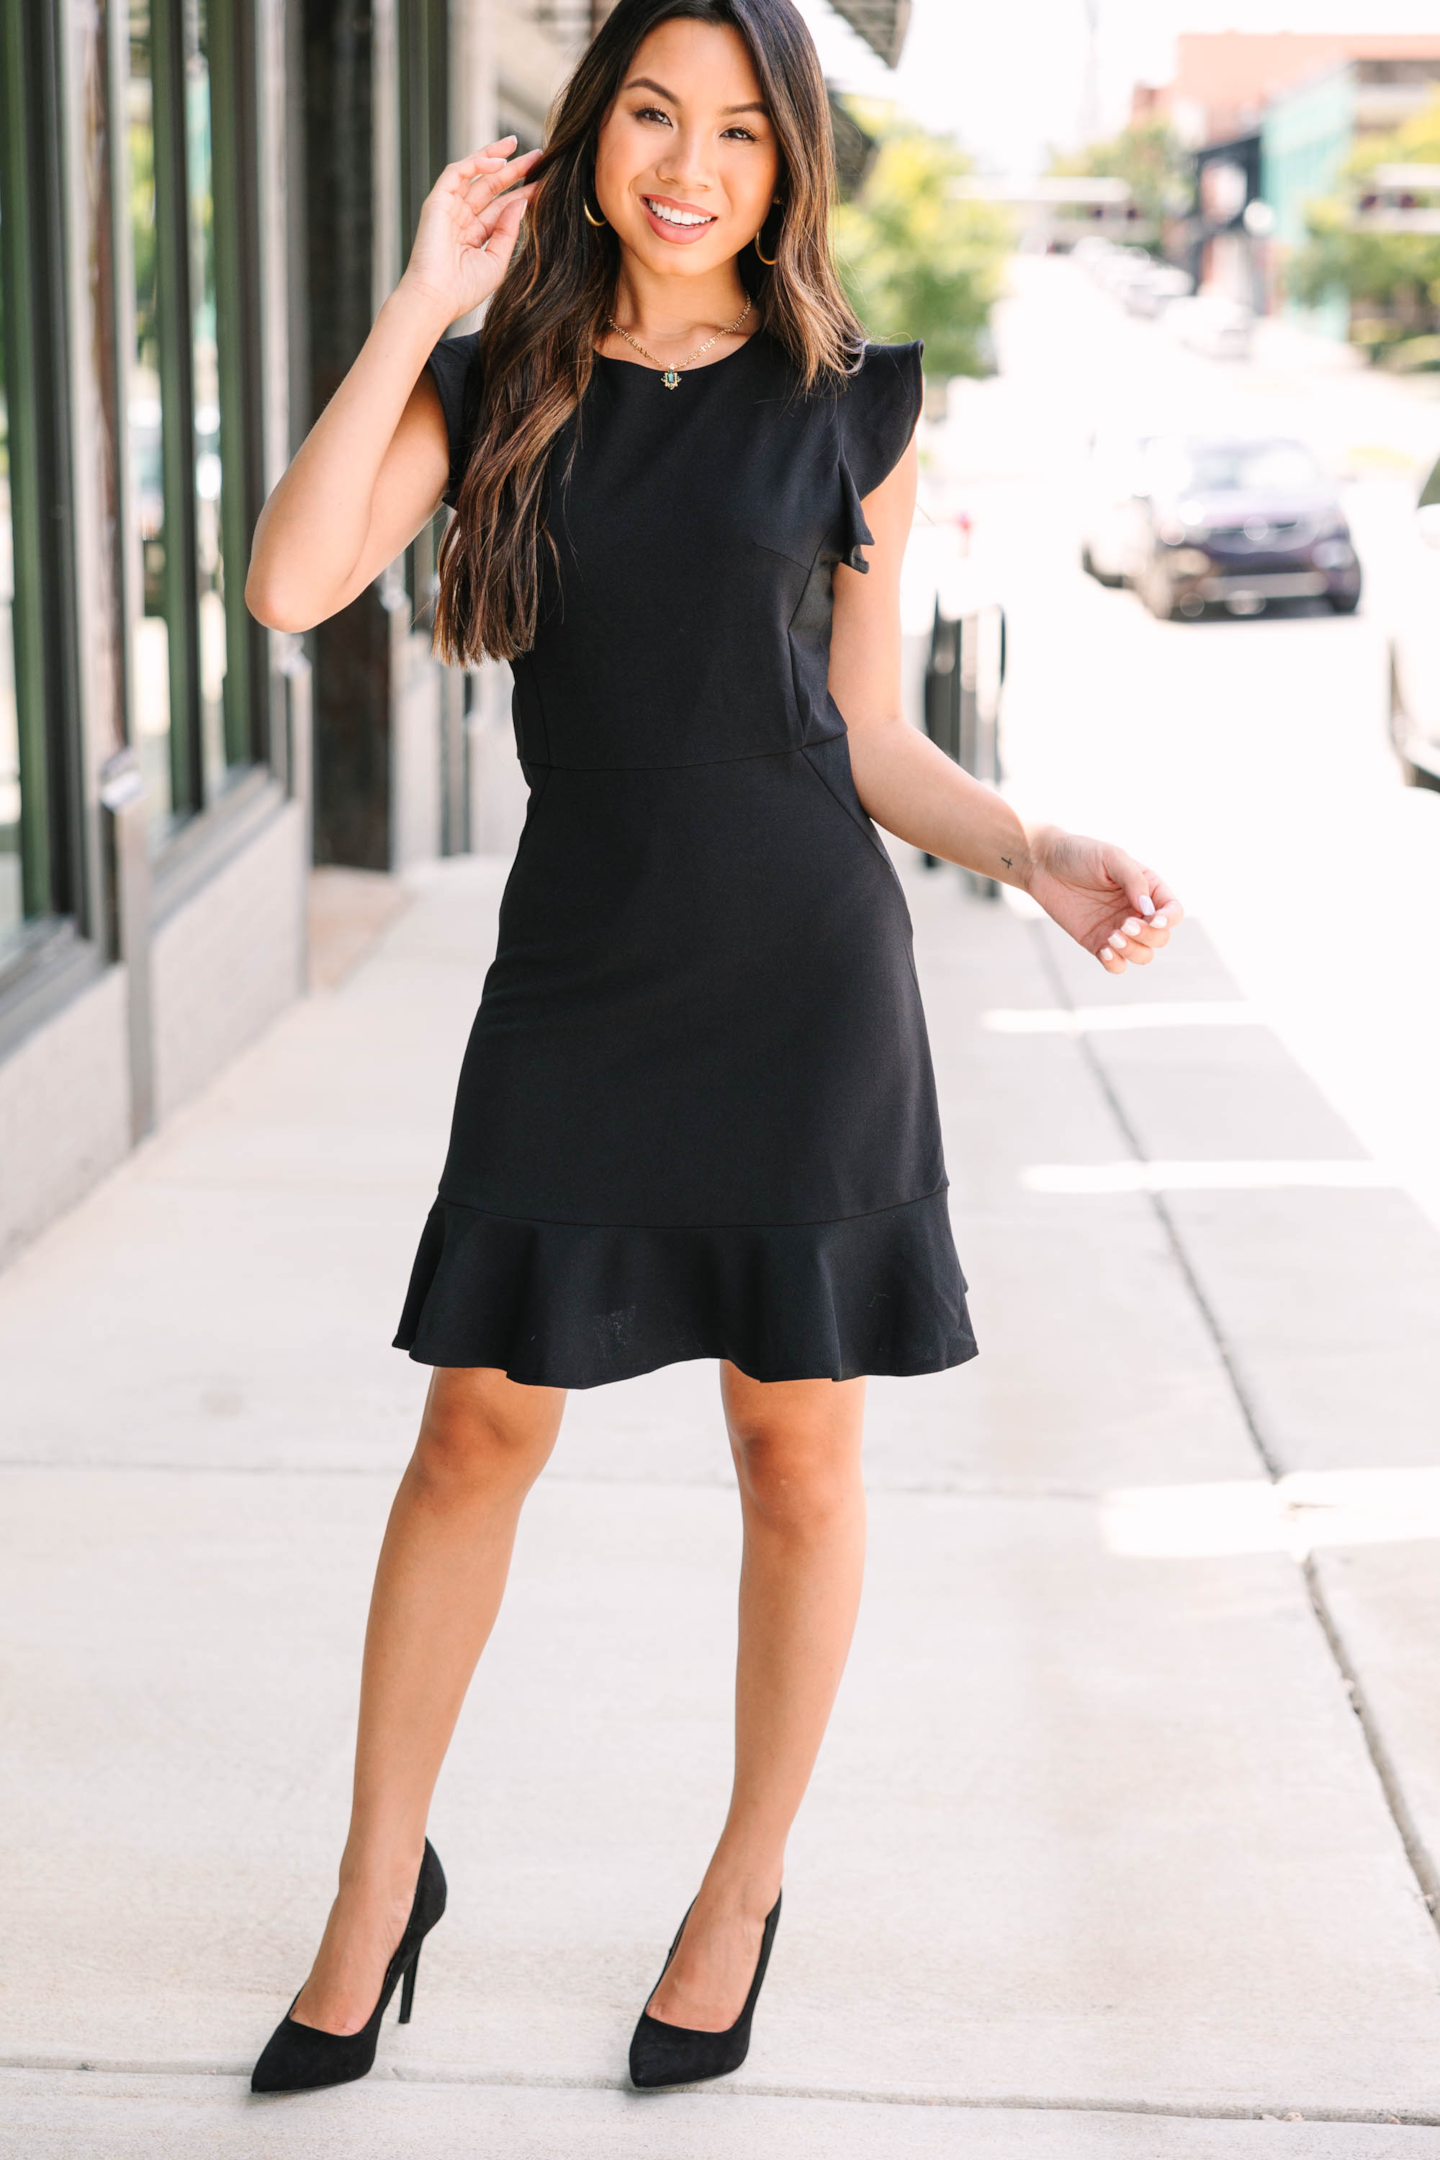 https://shopthemint.com/products/all-my-life-black-ruffled-dress?variant=39623718535226